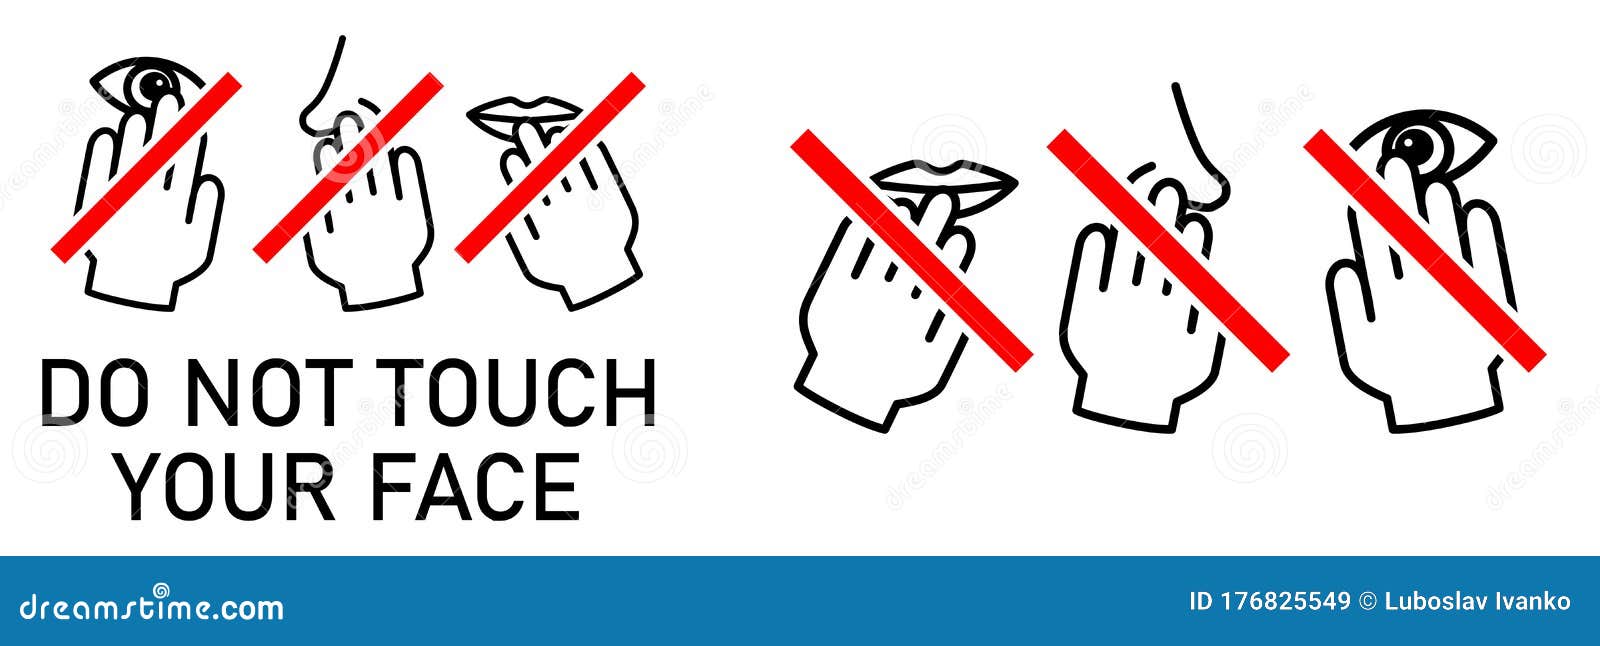 set of do not touch your face icon. simple black white drawing with hand touching mouth, nose, eye crossed by red line. can be